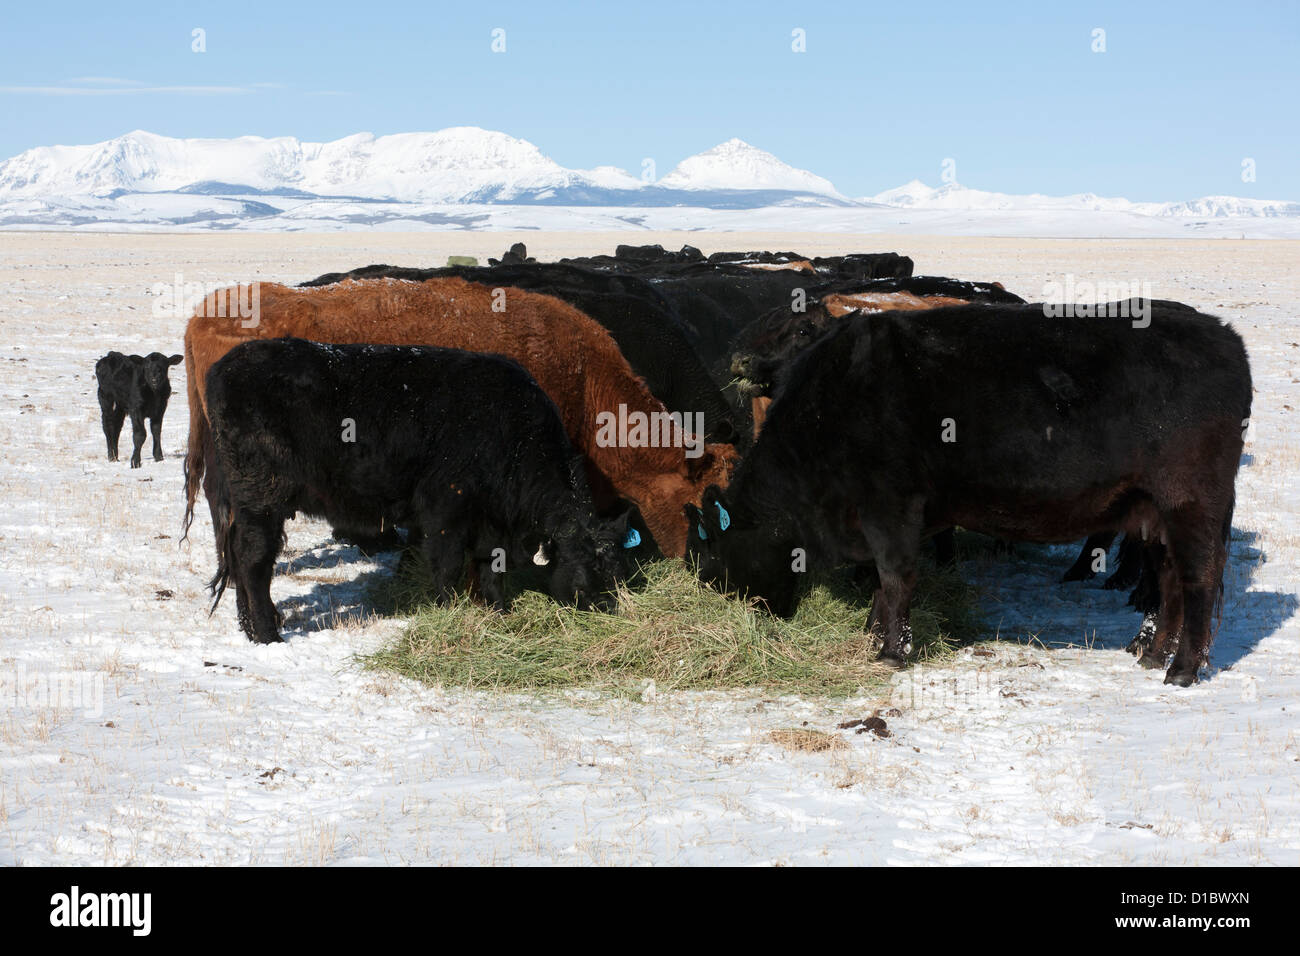 Black Angus cattle swarm over a row of hay rolled out across a snowy field, Rocky Mountains in background. Stock Photo